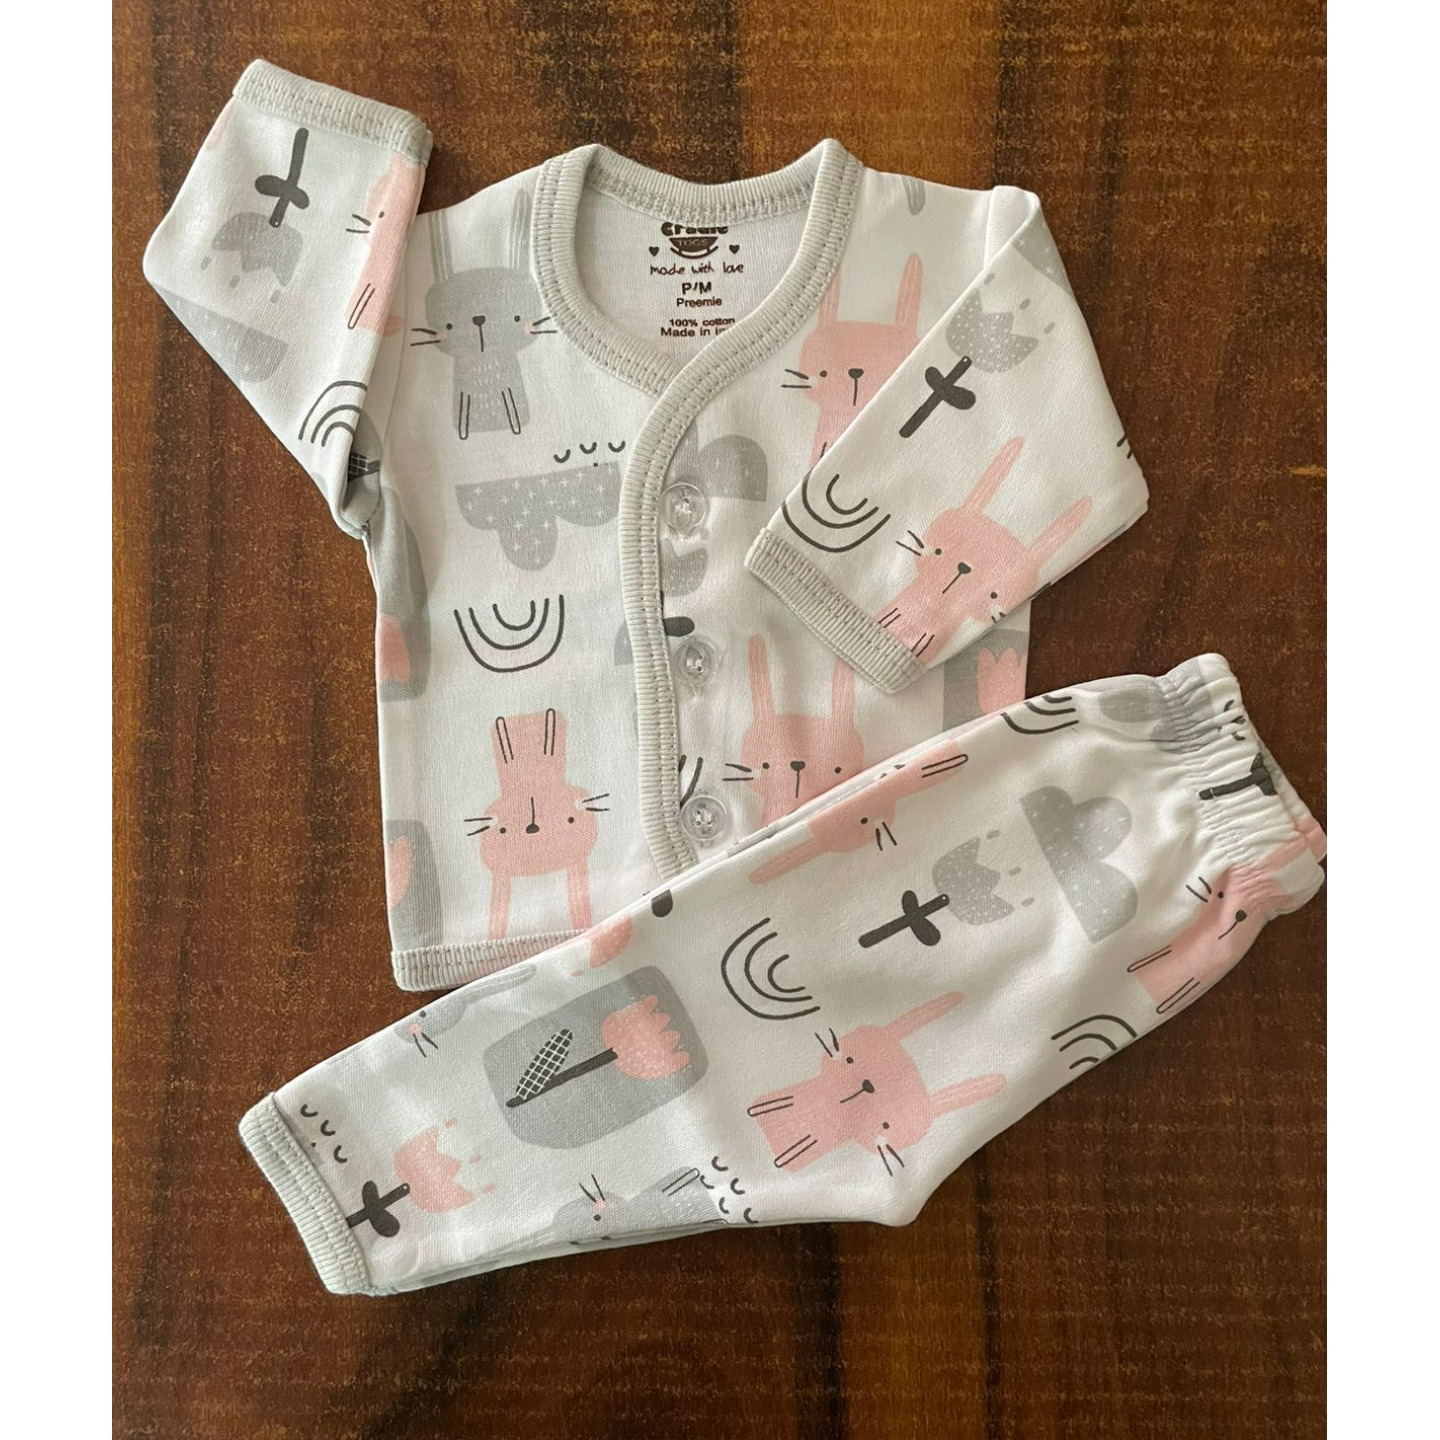 Cradle Full Sleeves Set Rs 430 Only Pre Mature Size Newborn Premie